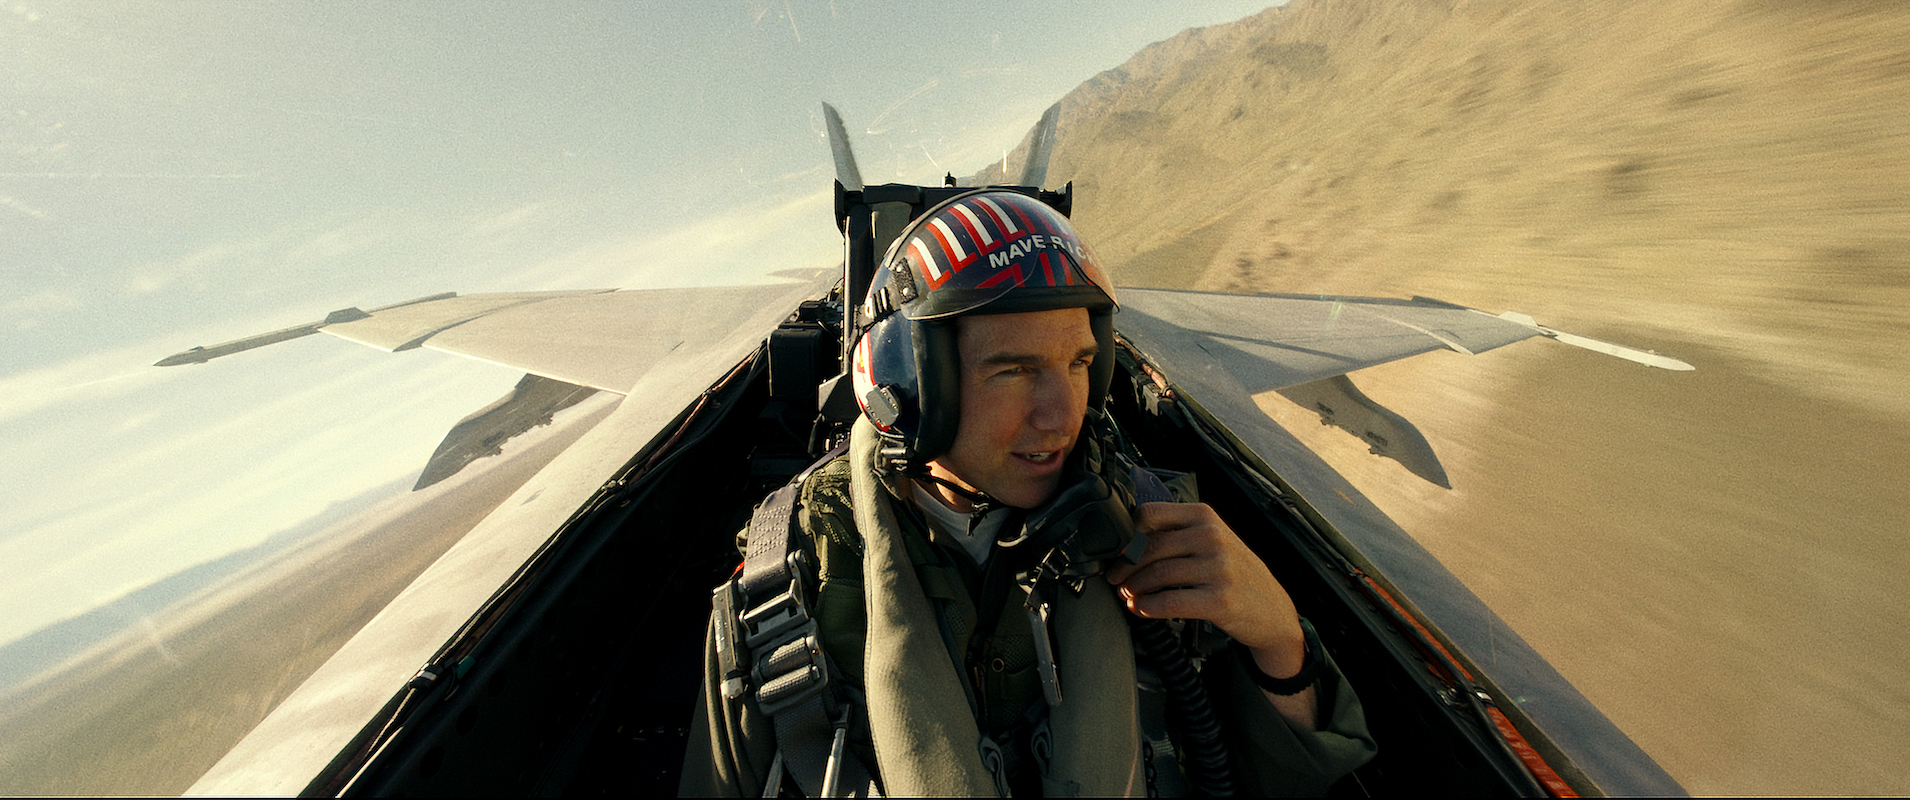 'Top Gun: Maverick': Tom Cruise sits in the cockpit of a fighter jet